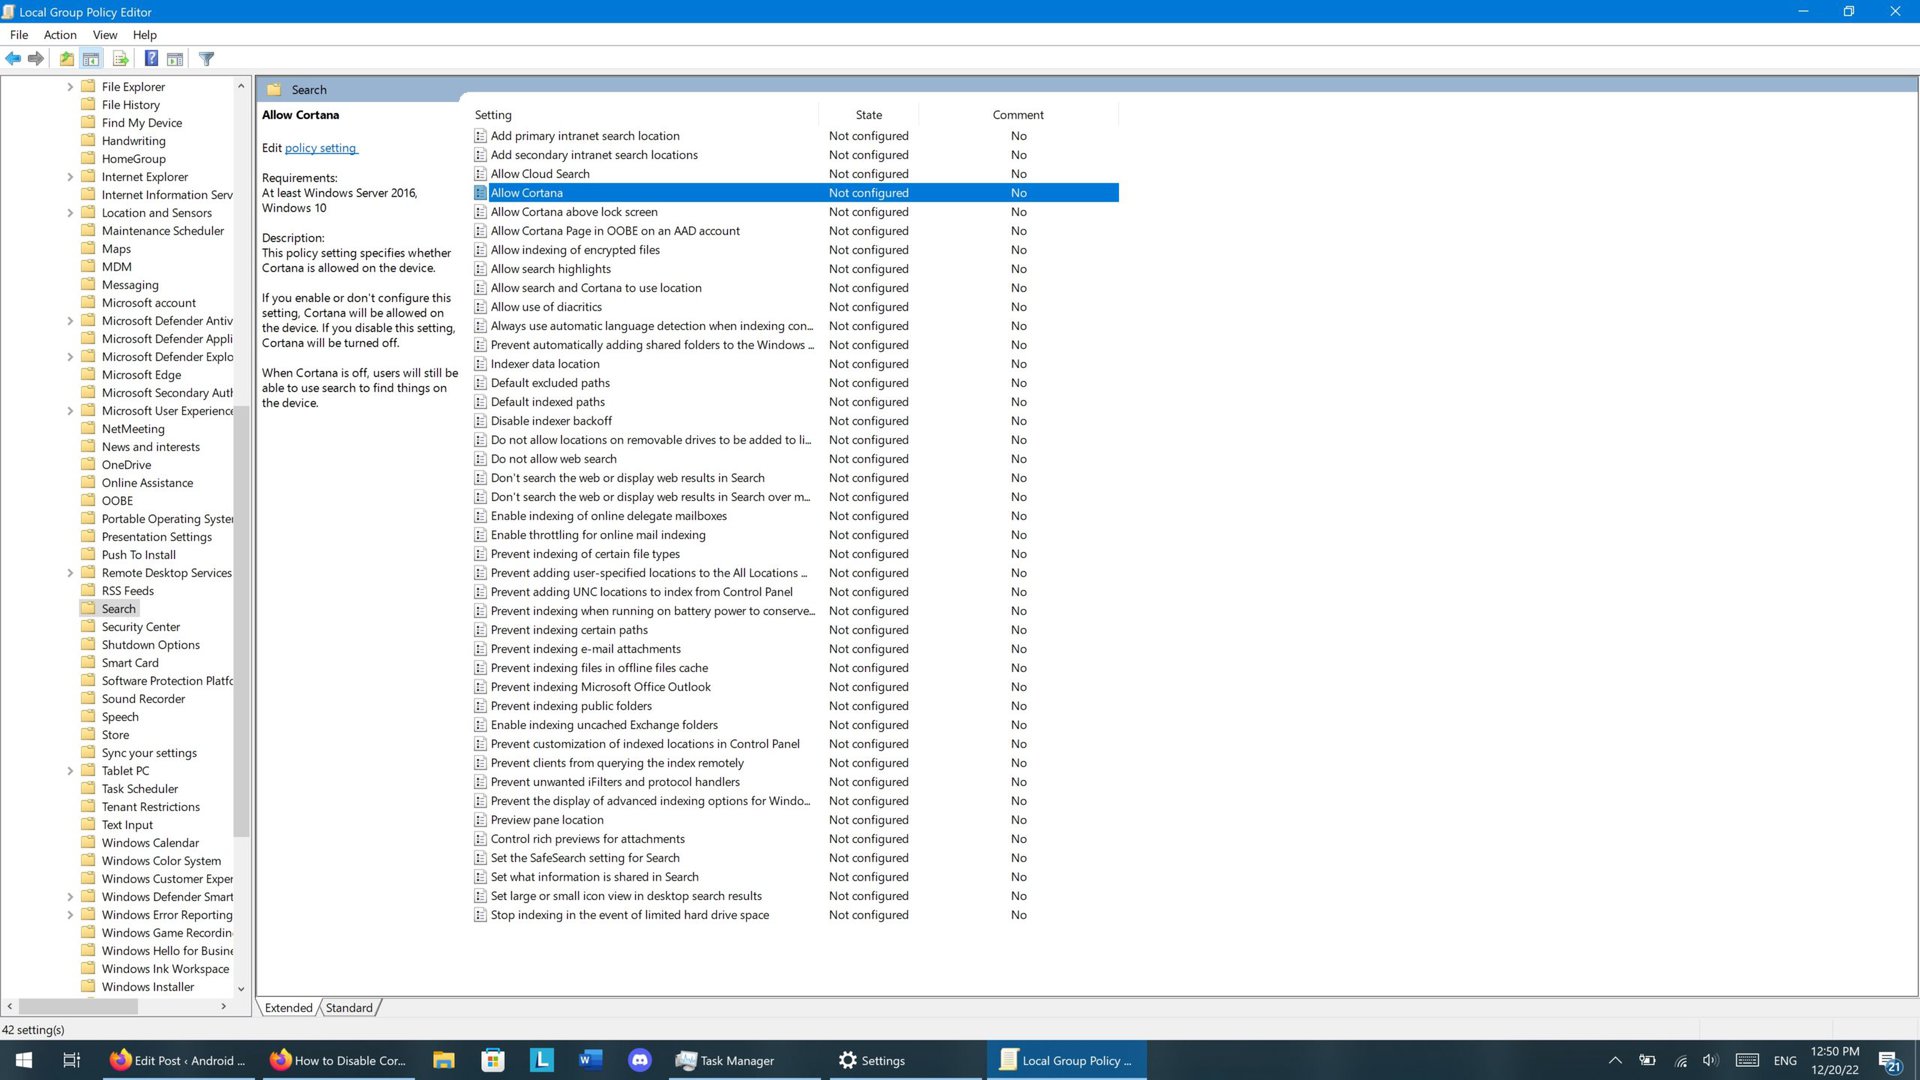 A screenshot of the Windos 10 Local Group Policy Editor showing the Cortana entry.